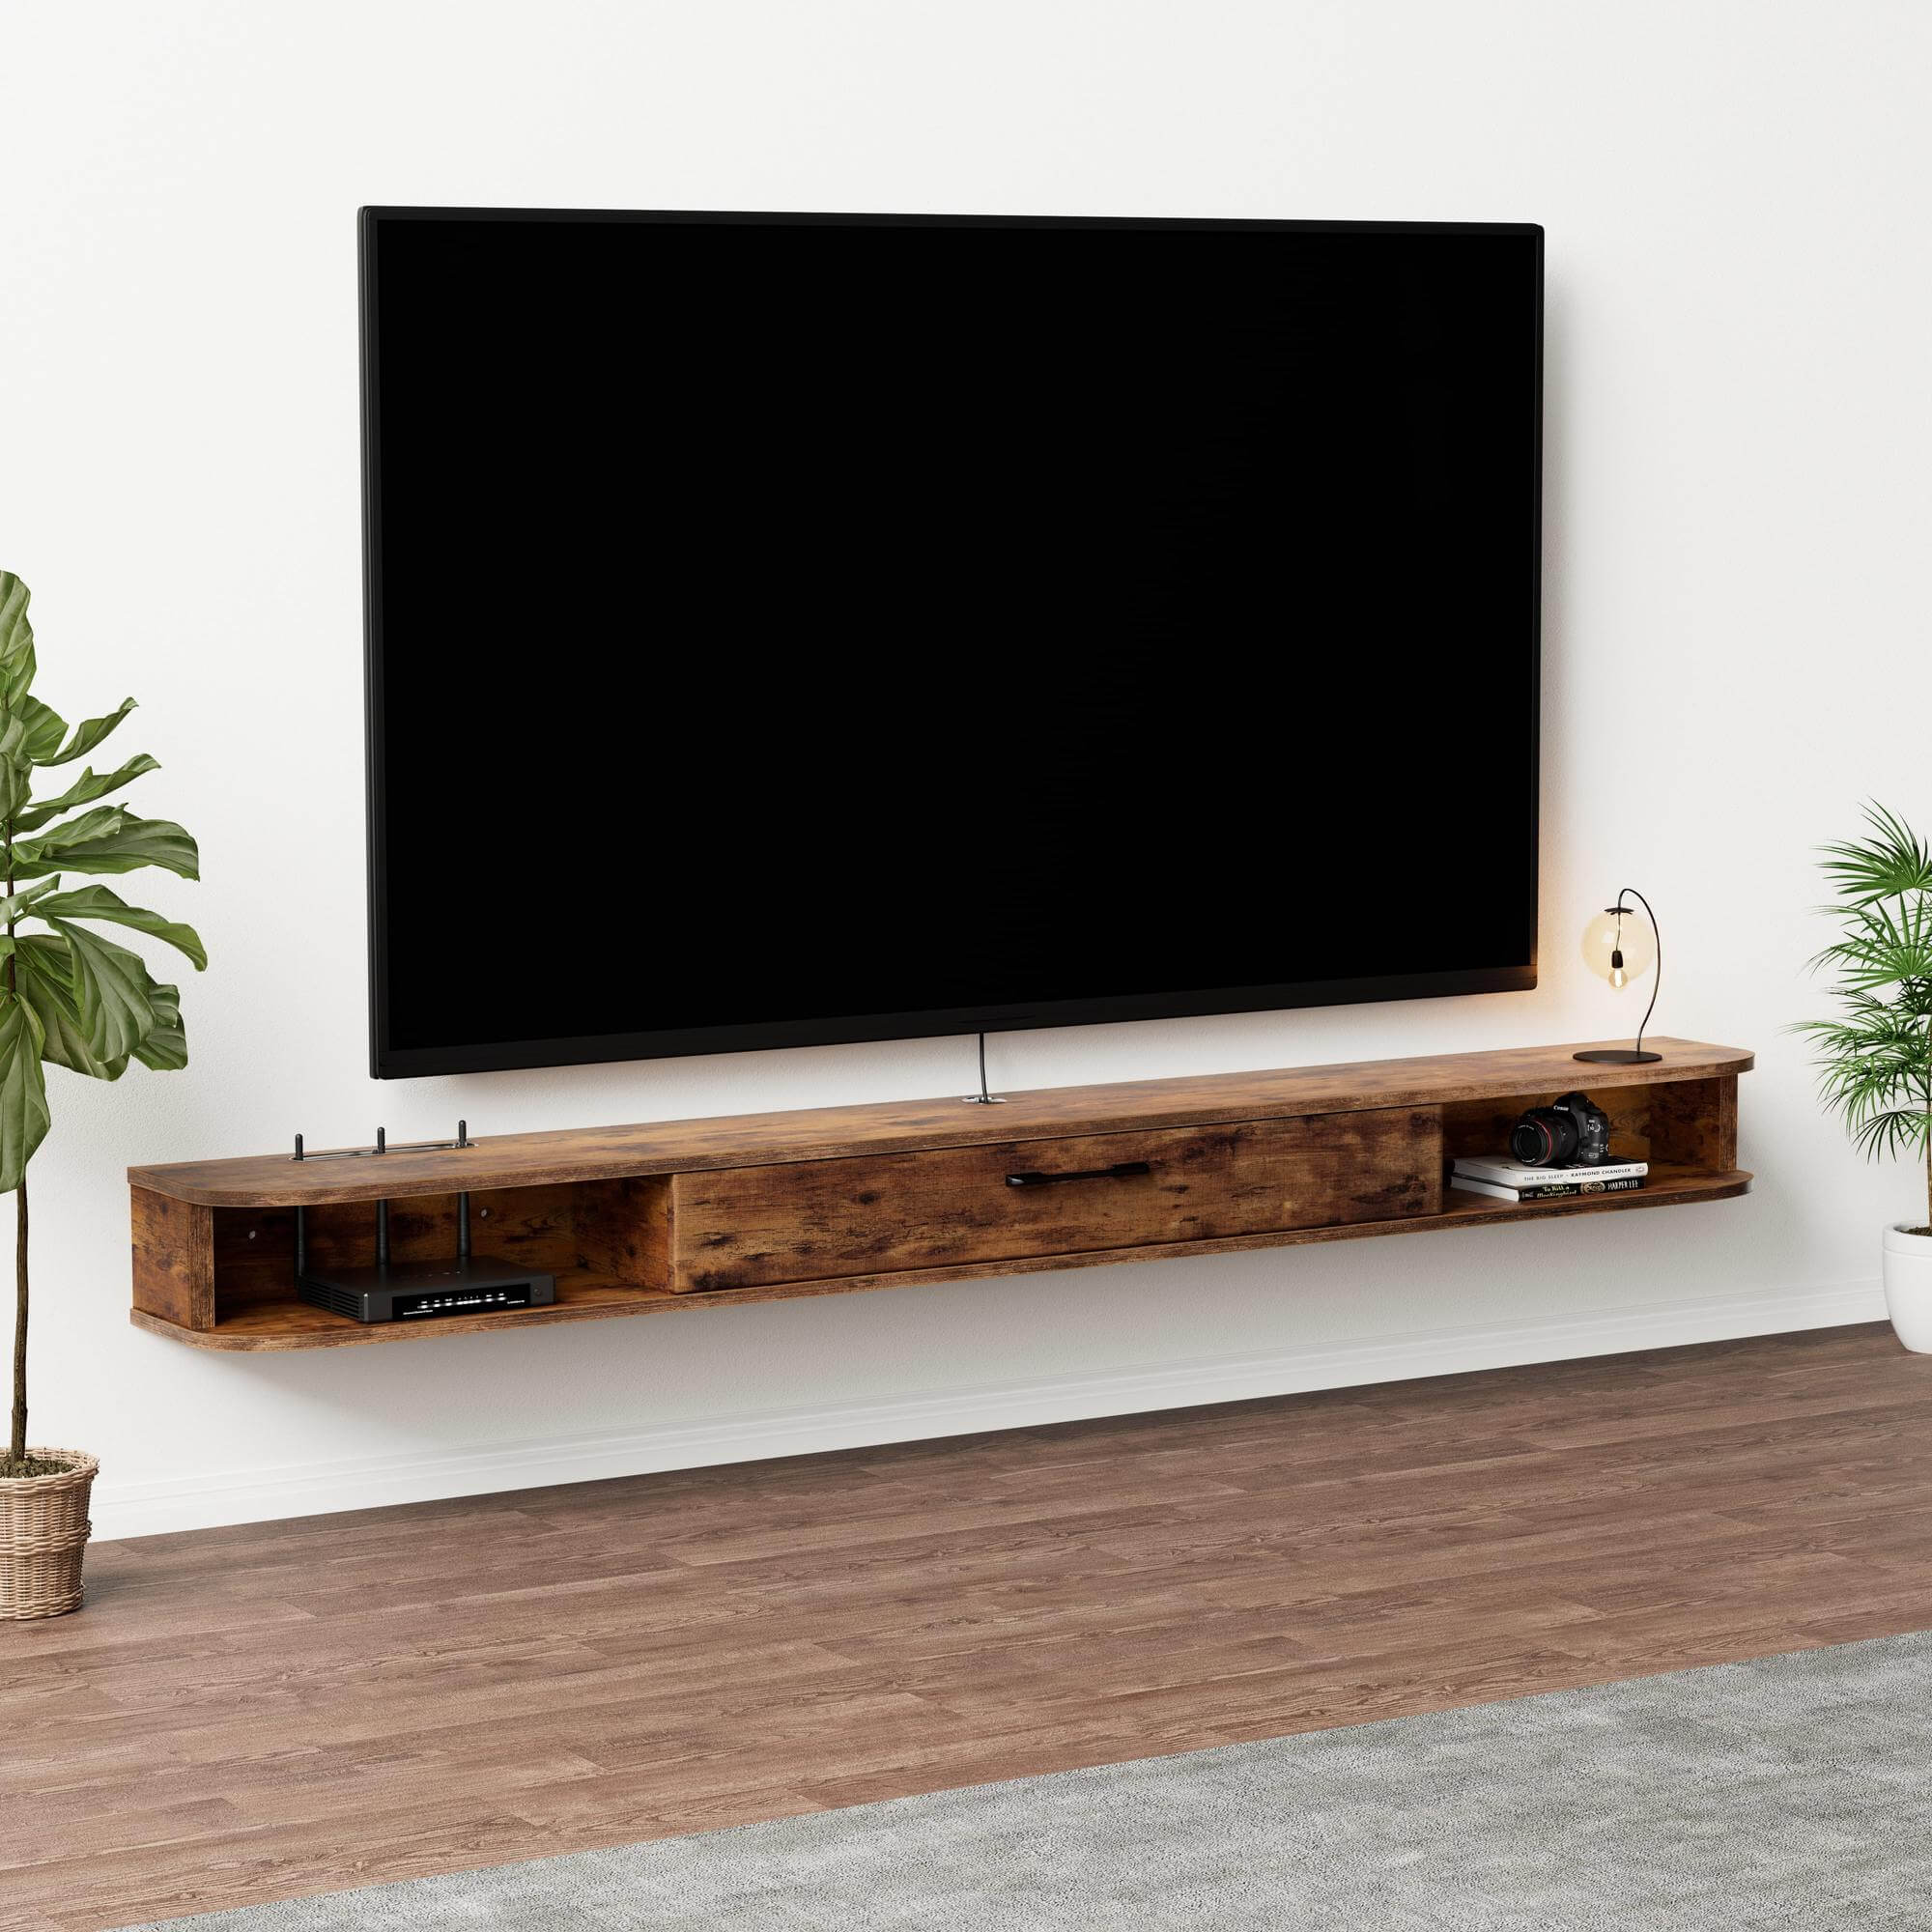 94.48" Rustic Brown Plywood Slim Floating TV Stand Wall Shelf for 85-100 Inch TVs